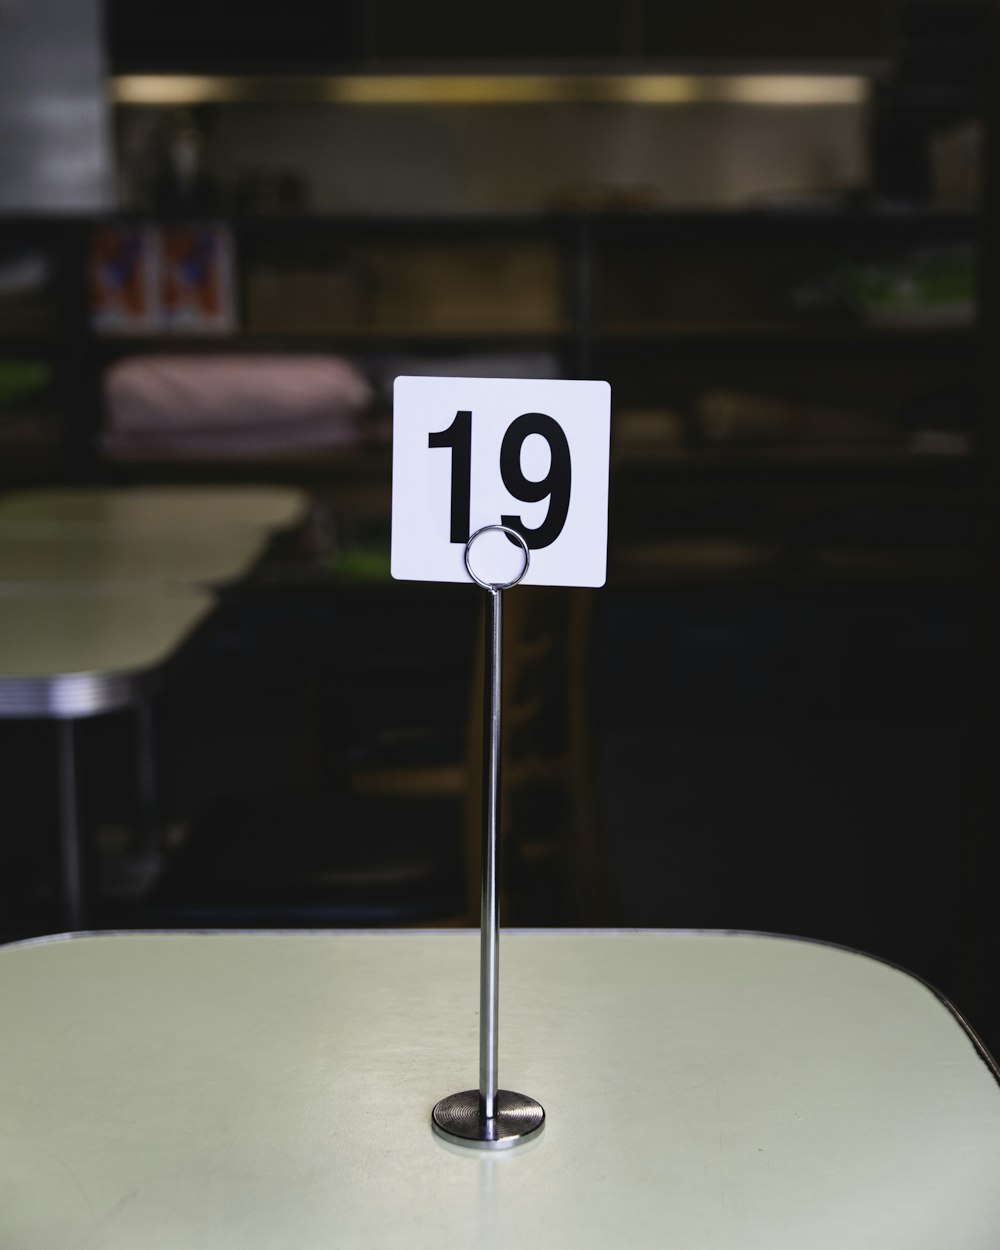 table number 19 on table inside room